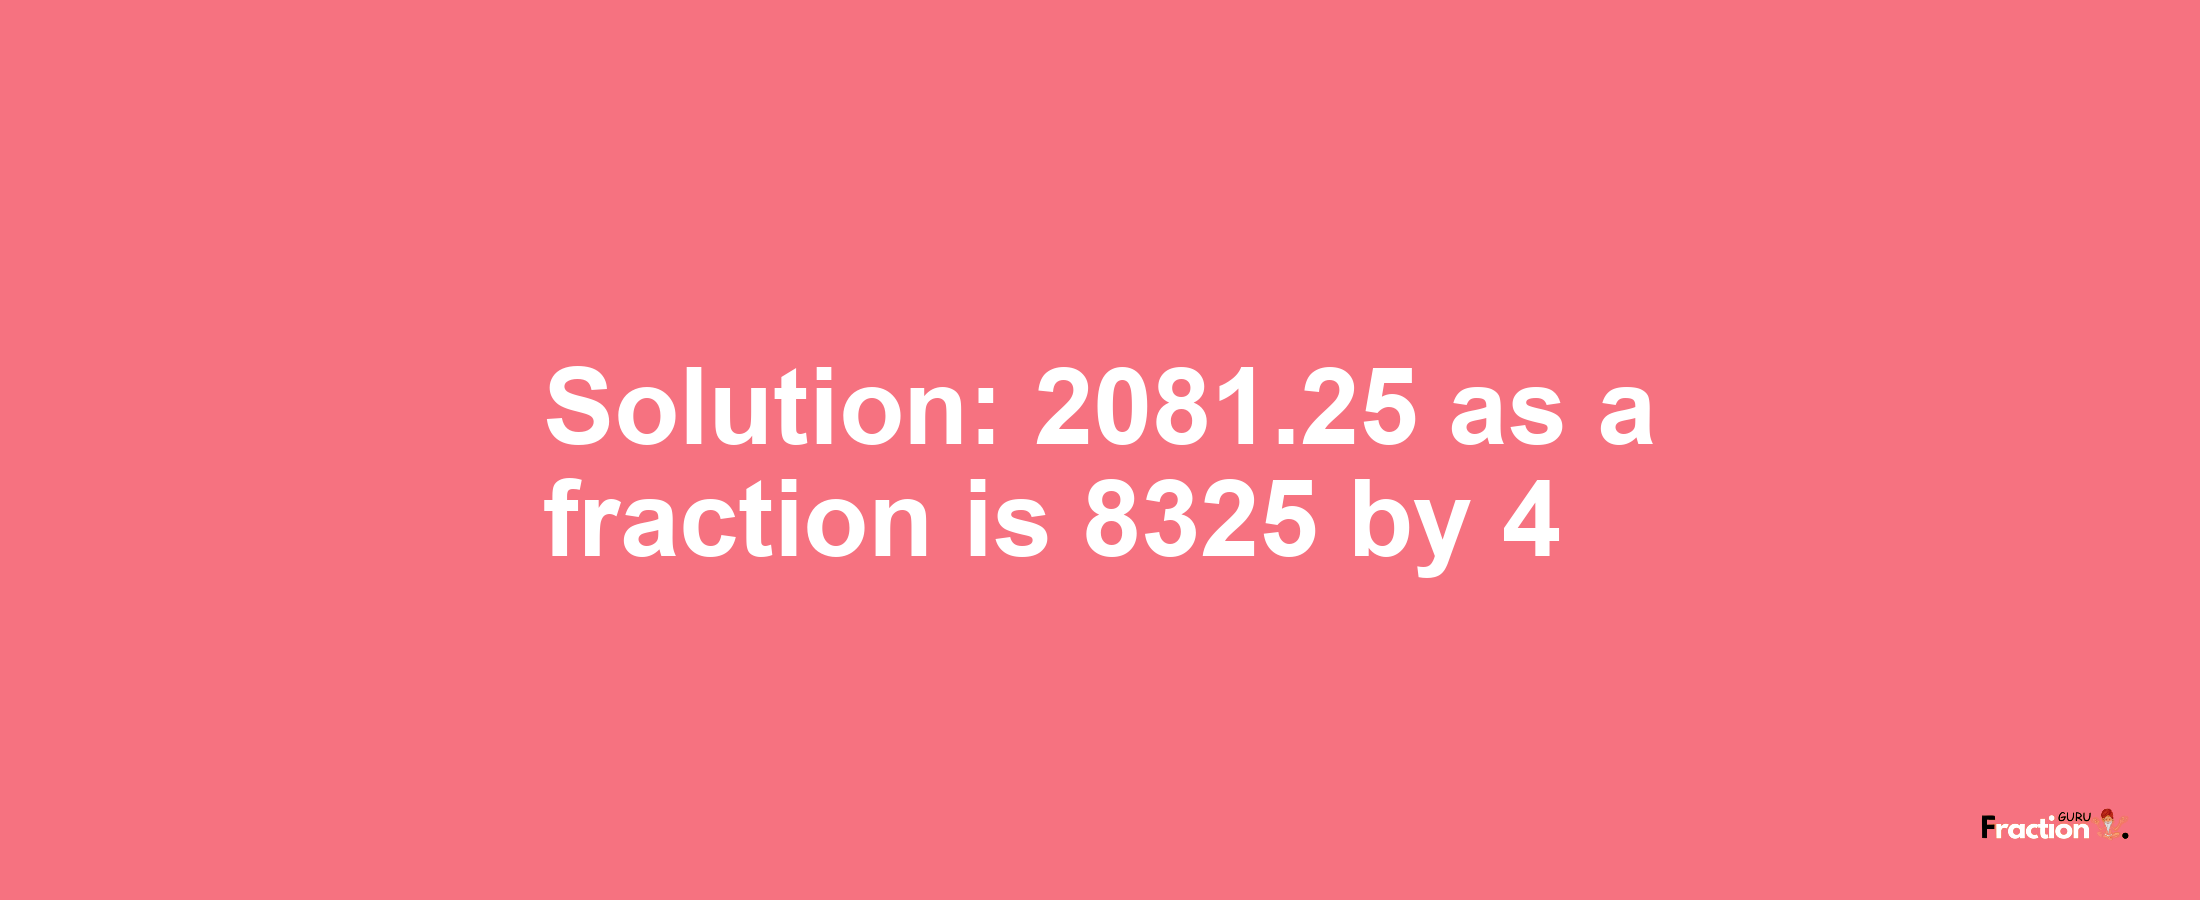 Solution:2081.25 as a fraction is 8325/4